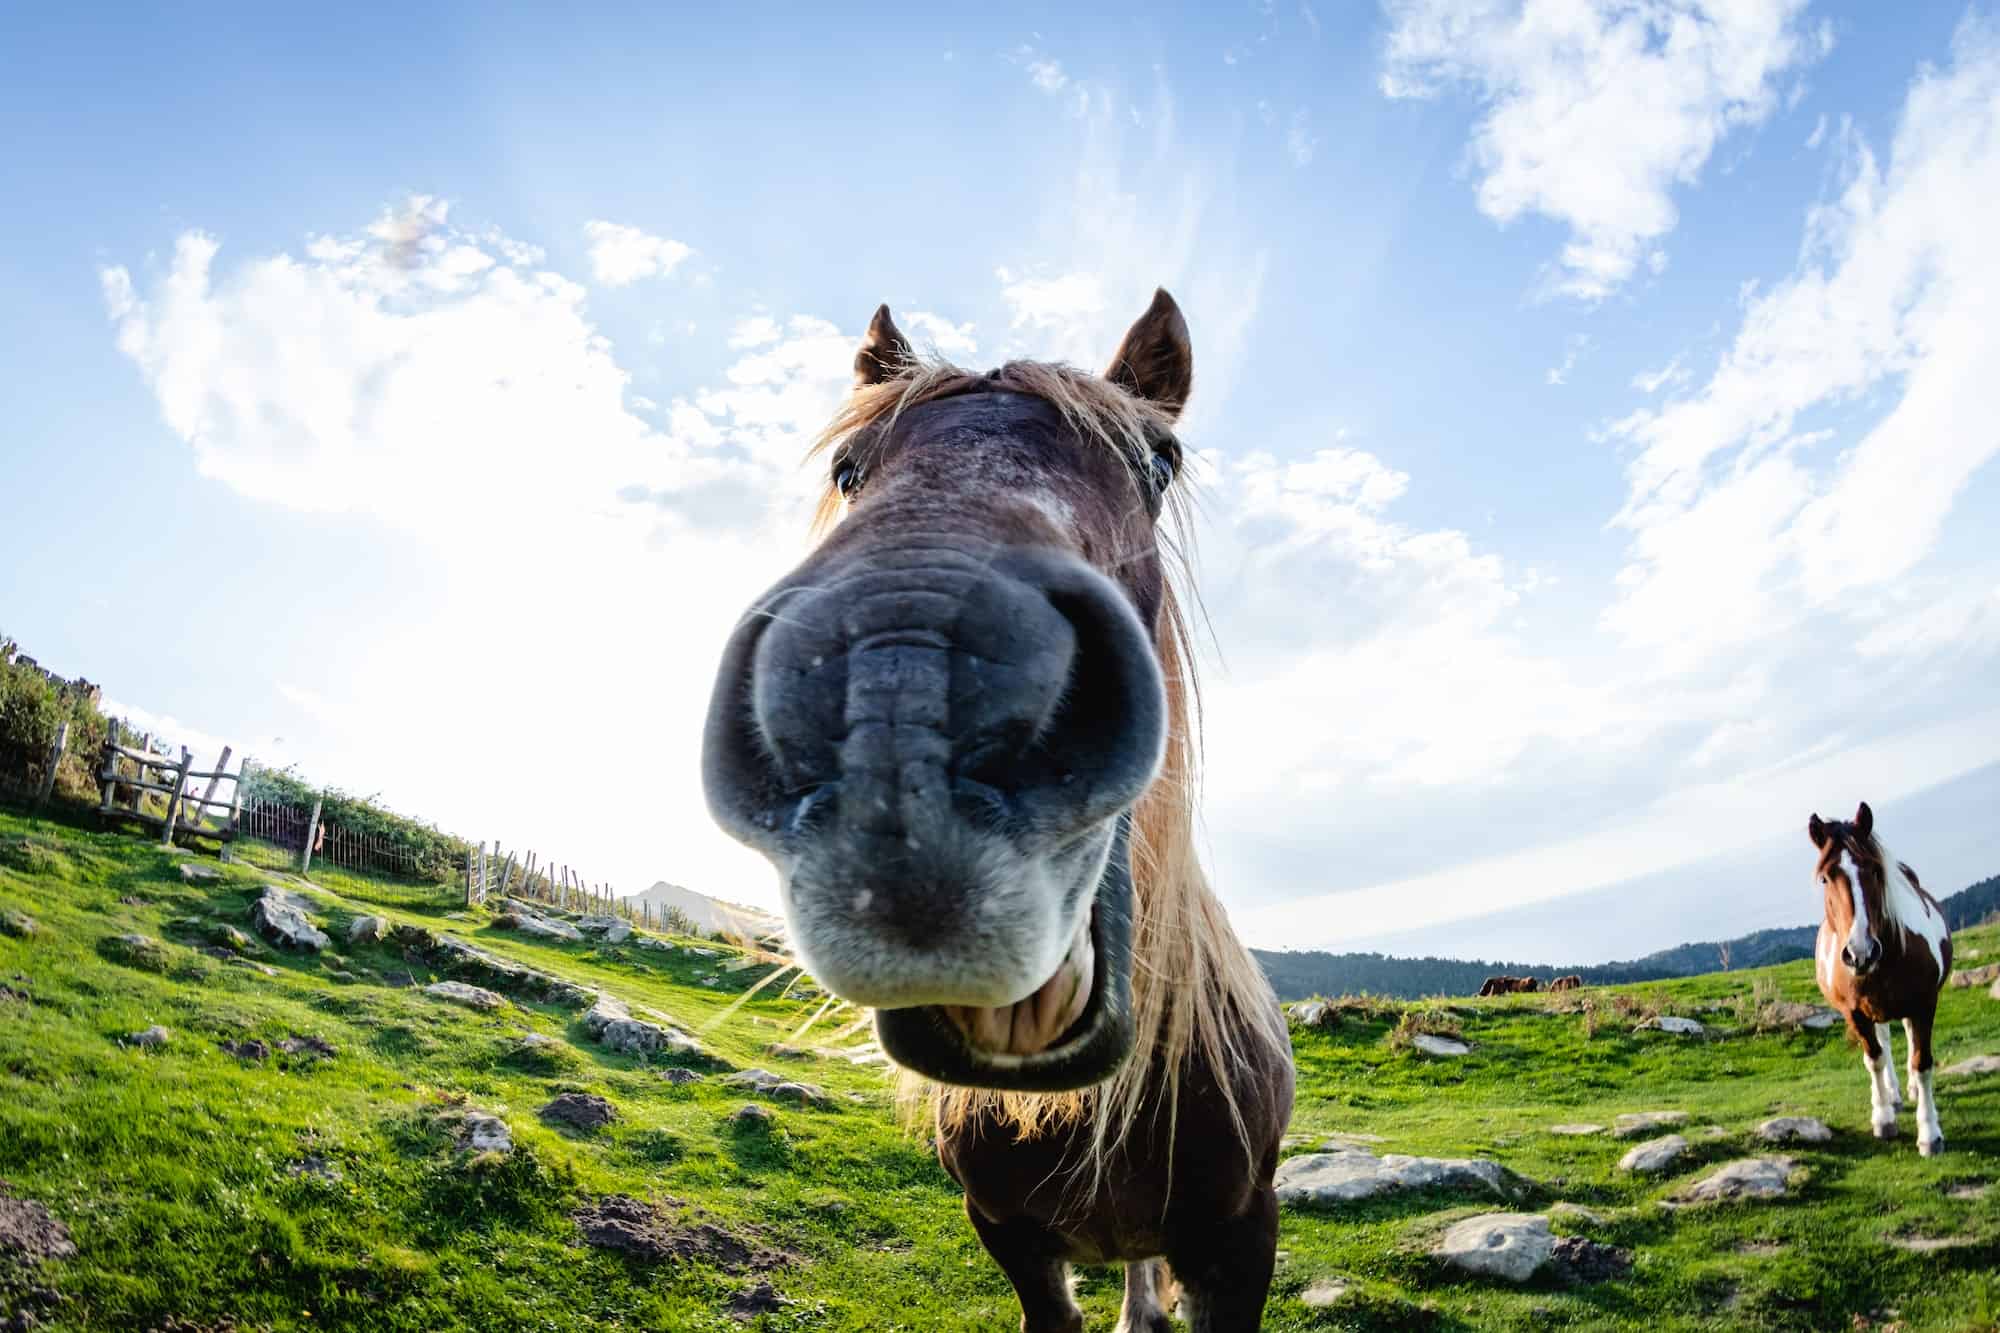 horses with funny and curious faces in freedom on the mountain